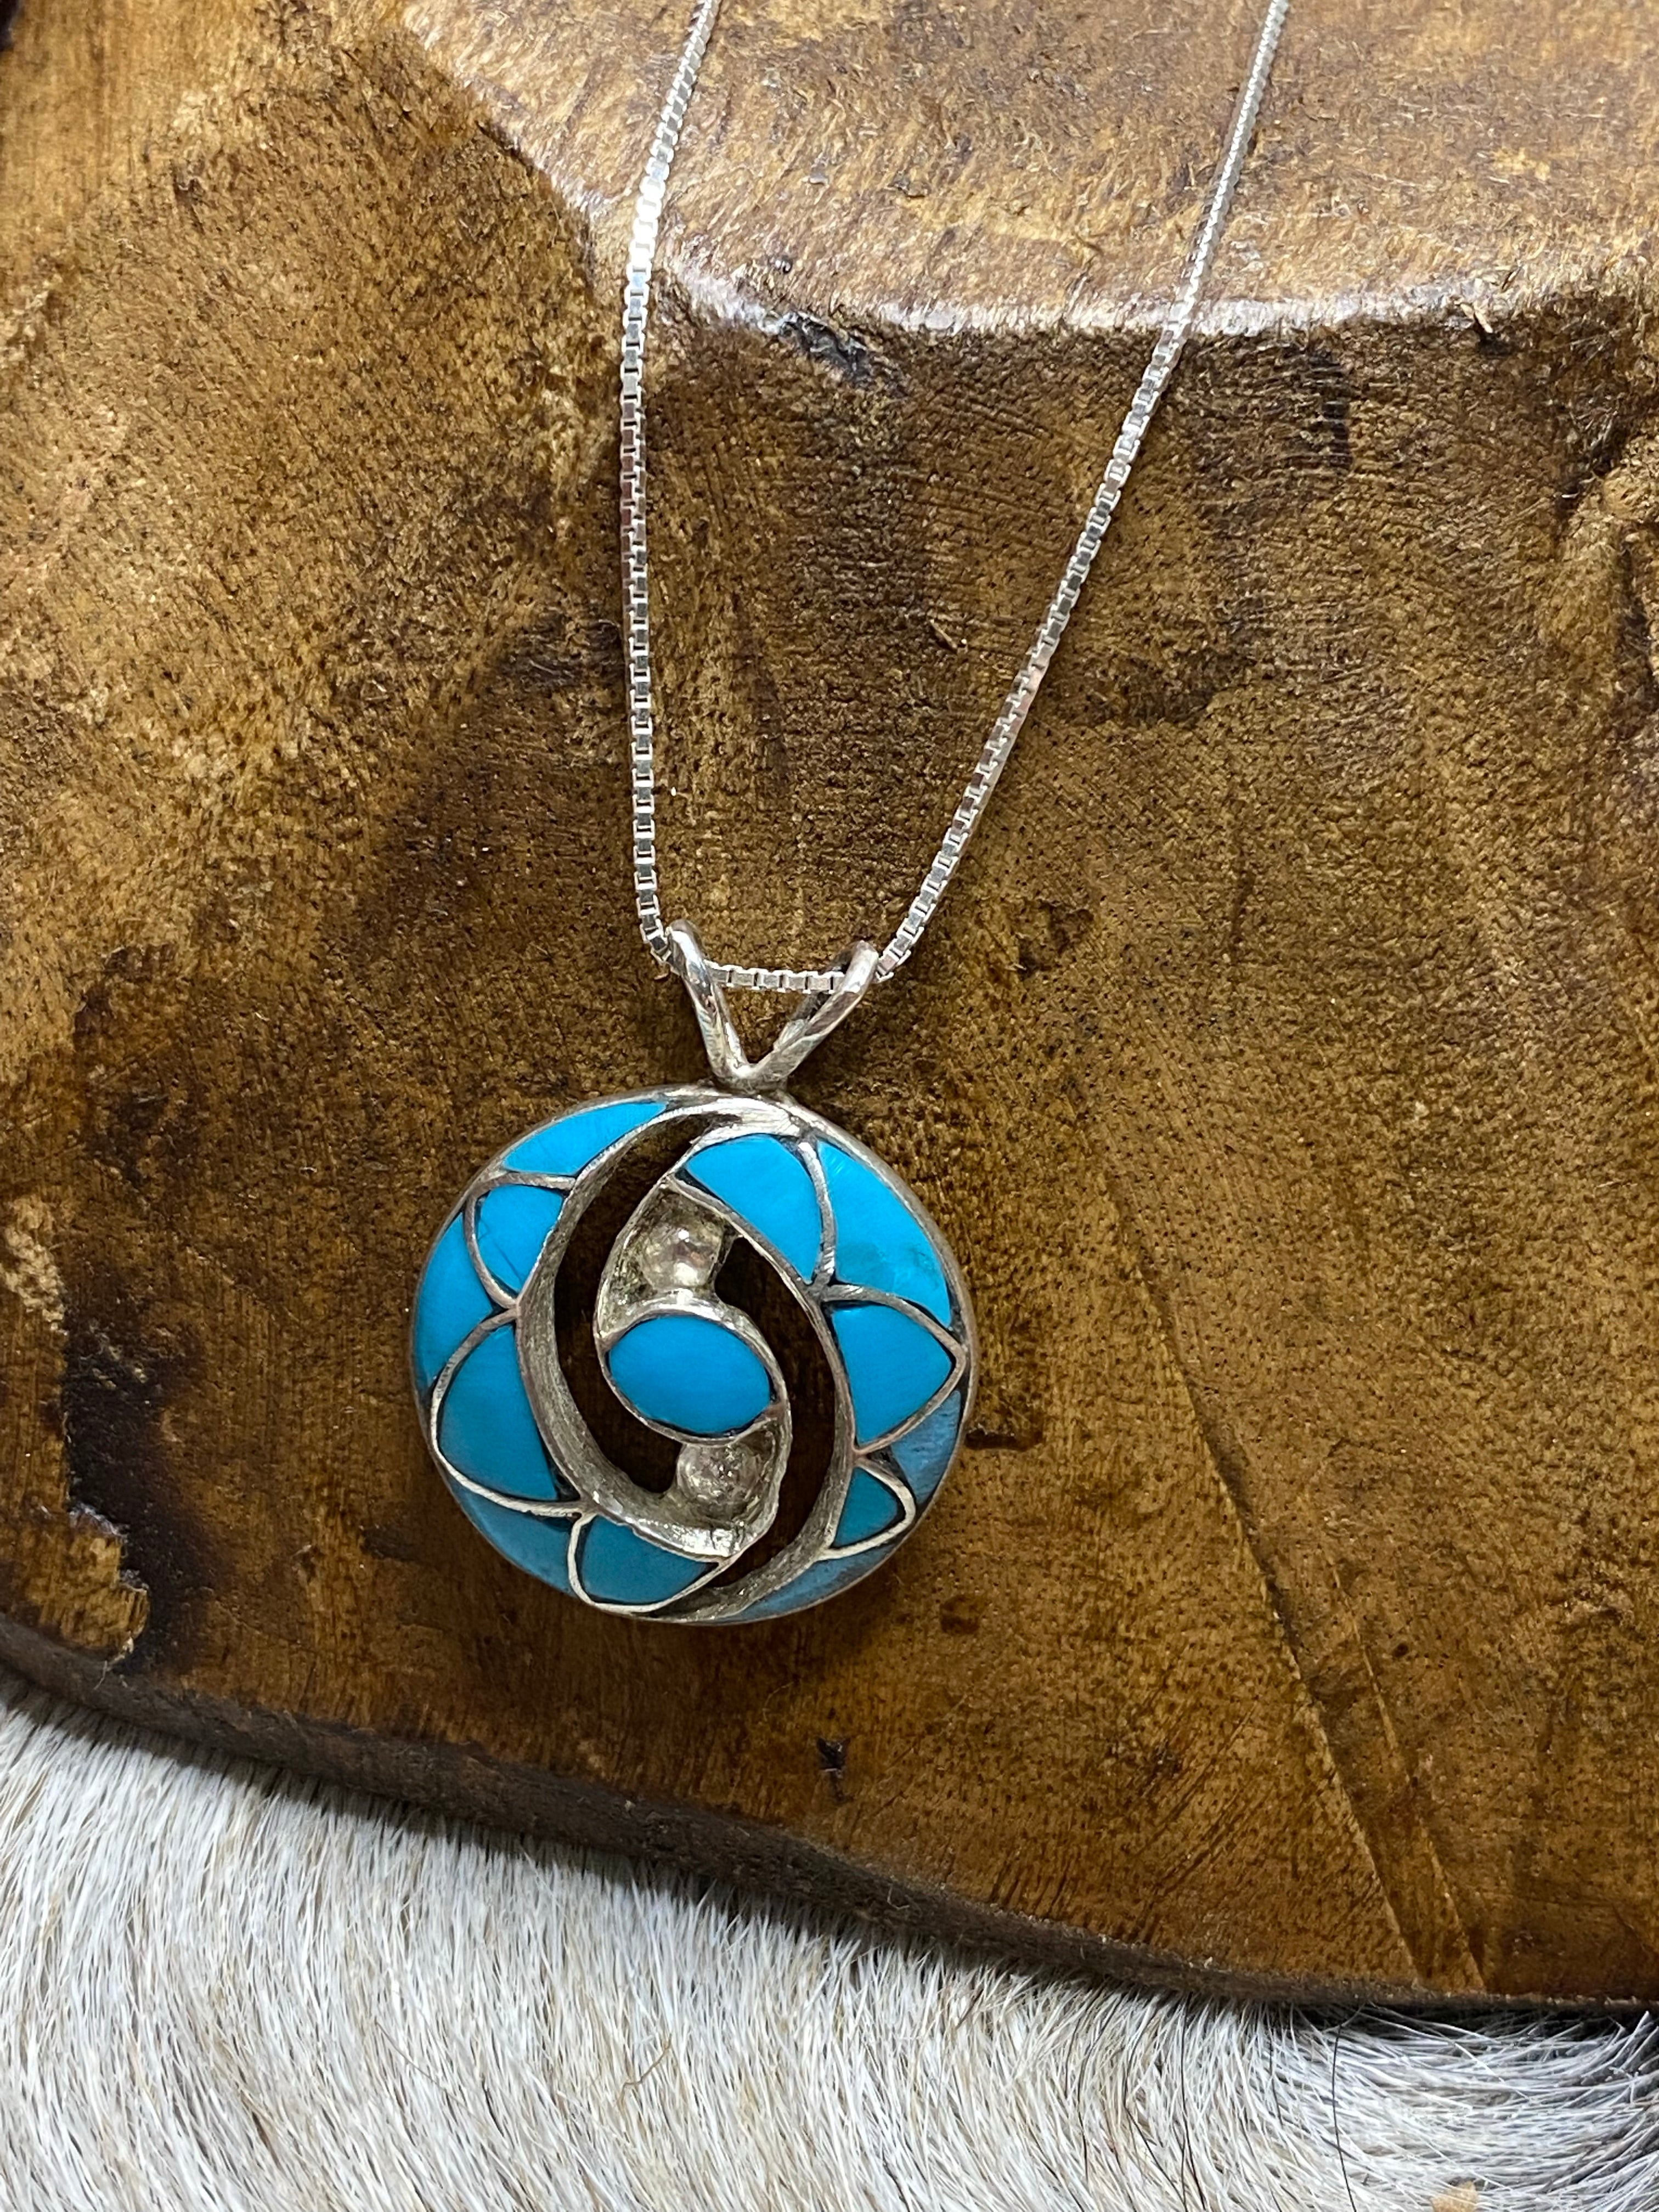 Turquoise Flower Sterling Silver Necklace